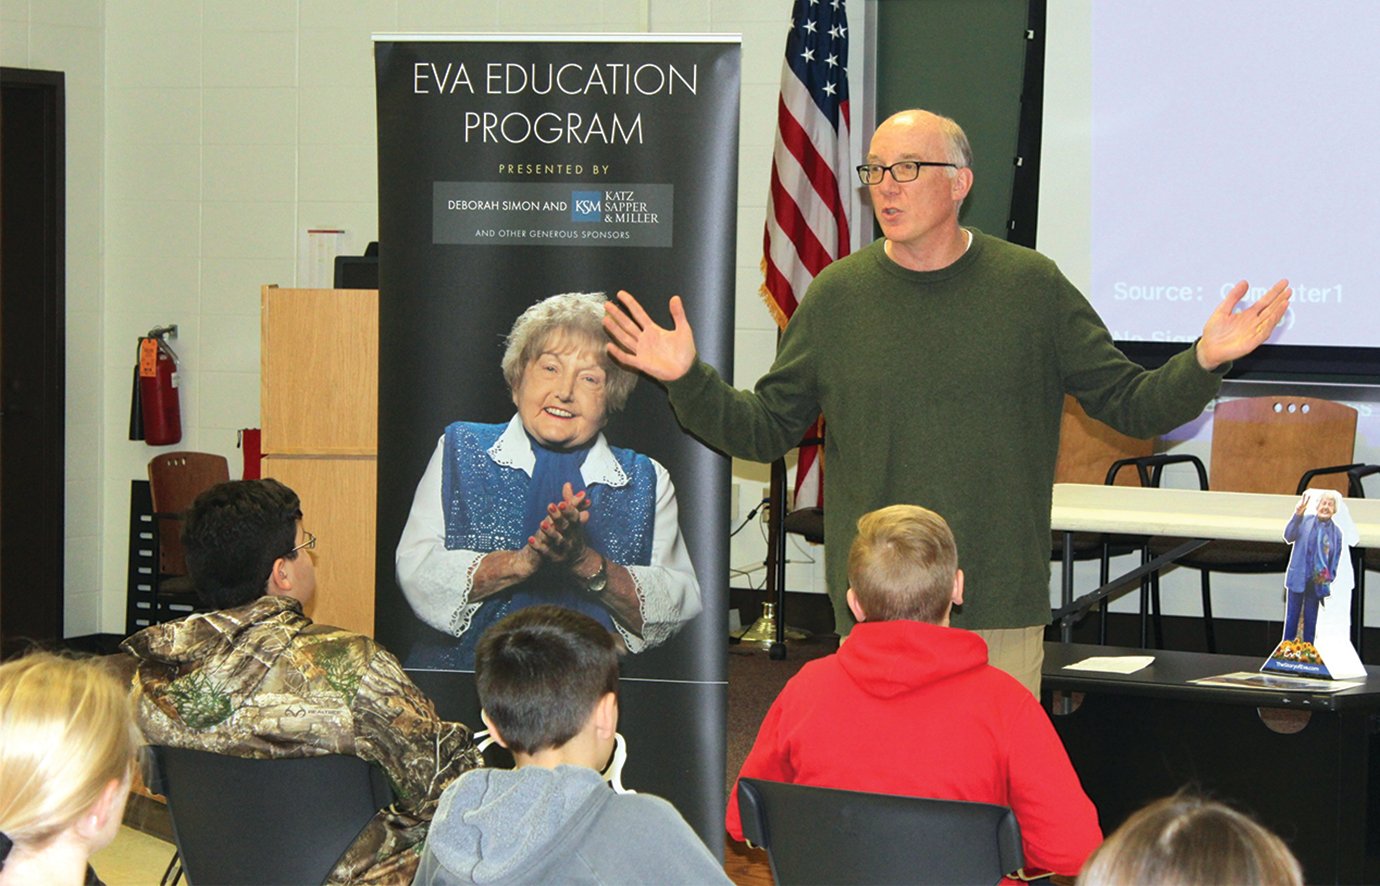 Filmmaker Ted Green, of Ted Green Films, LLC., explains what the Eva Education Program's virtual reality presentation will be like to middle school students before allowing them to experience a virtual tour of Auschwitz using Google Goggles, Monday at Southmont High School.